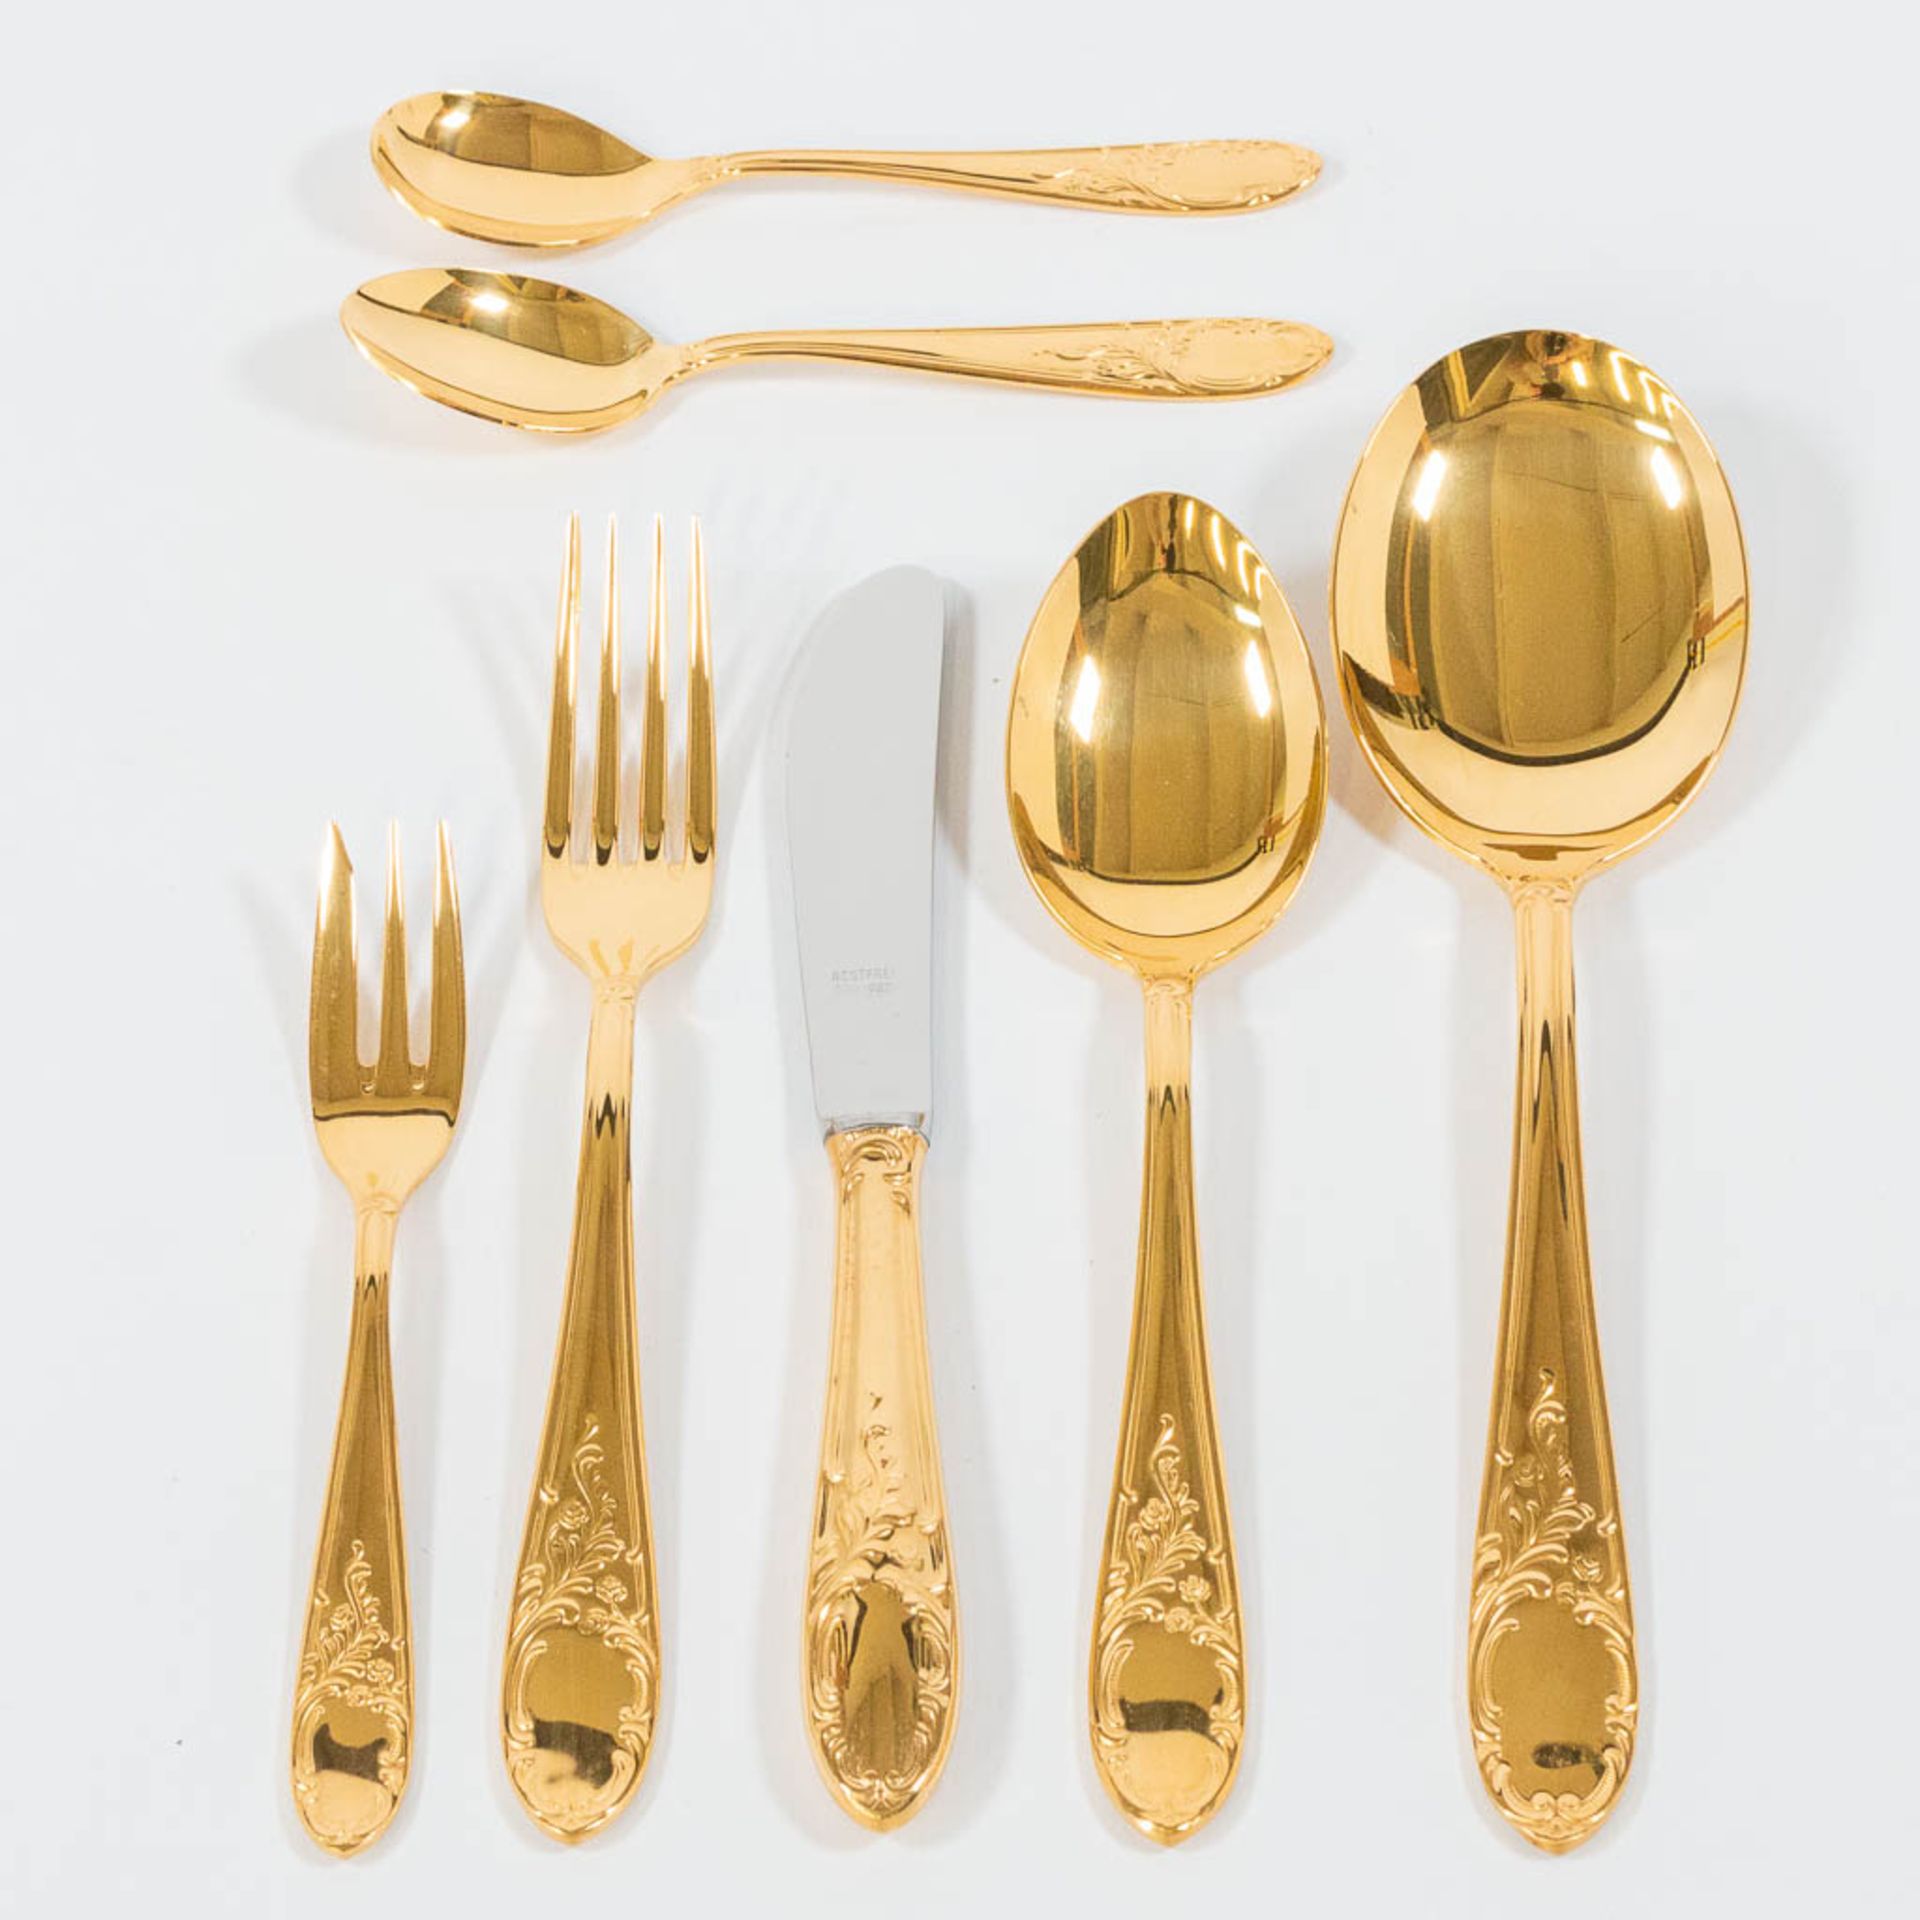 A gold-plated cuttlery set, made by Solingen in Germany. Inox 18/10 gold-plated 23 karat. - Bild 8 aus 23